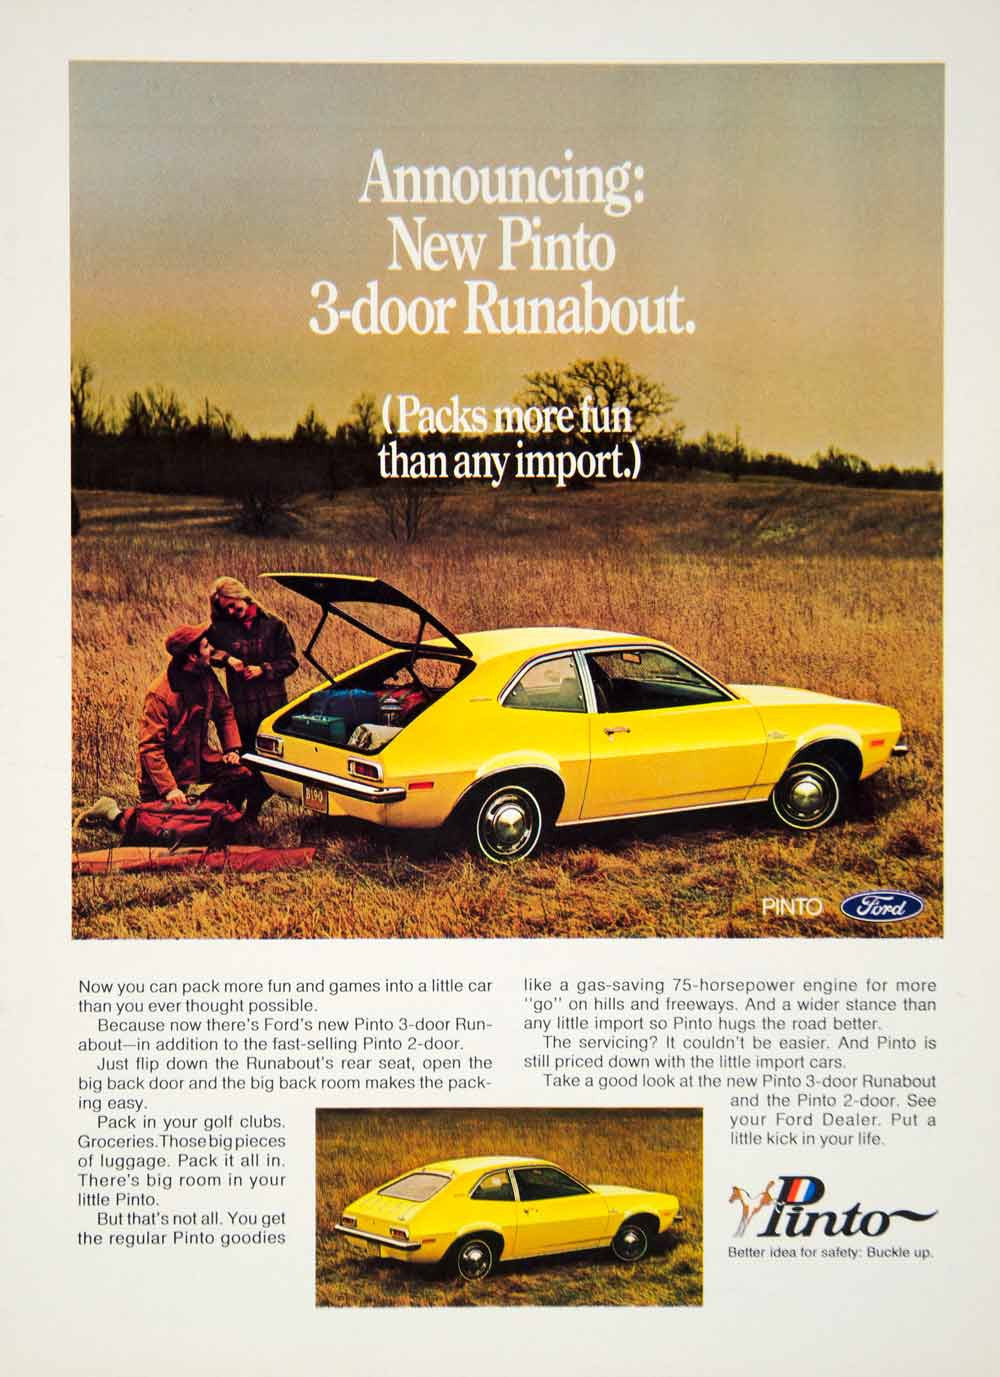 1971 Ad Ford Pinto 3 Door Runabout Hatchback Subcompact Car Camping YCD8 - Period Paper
